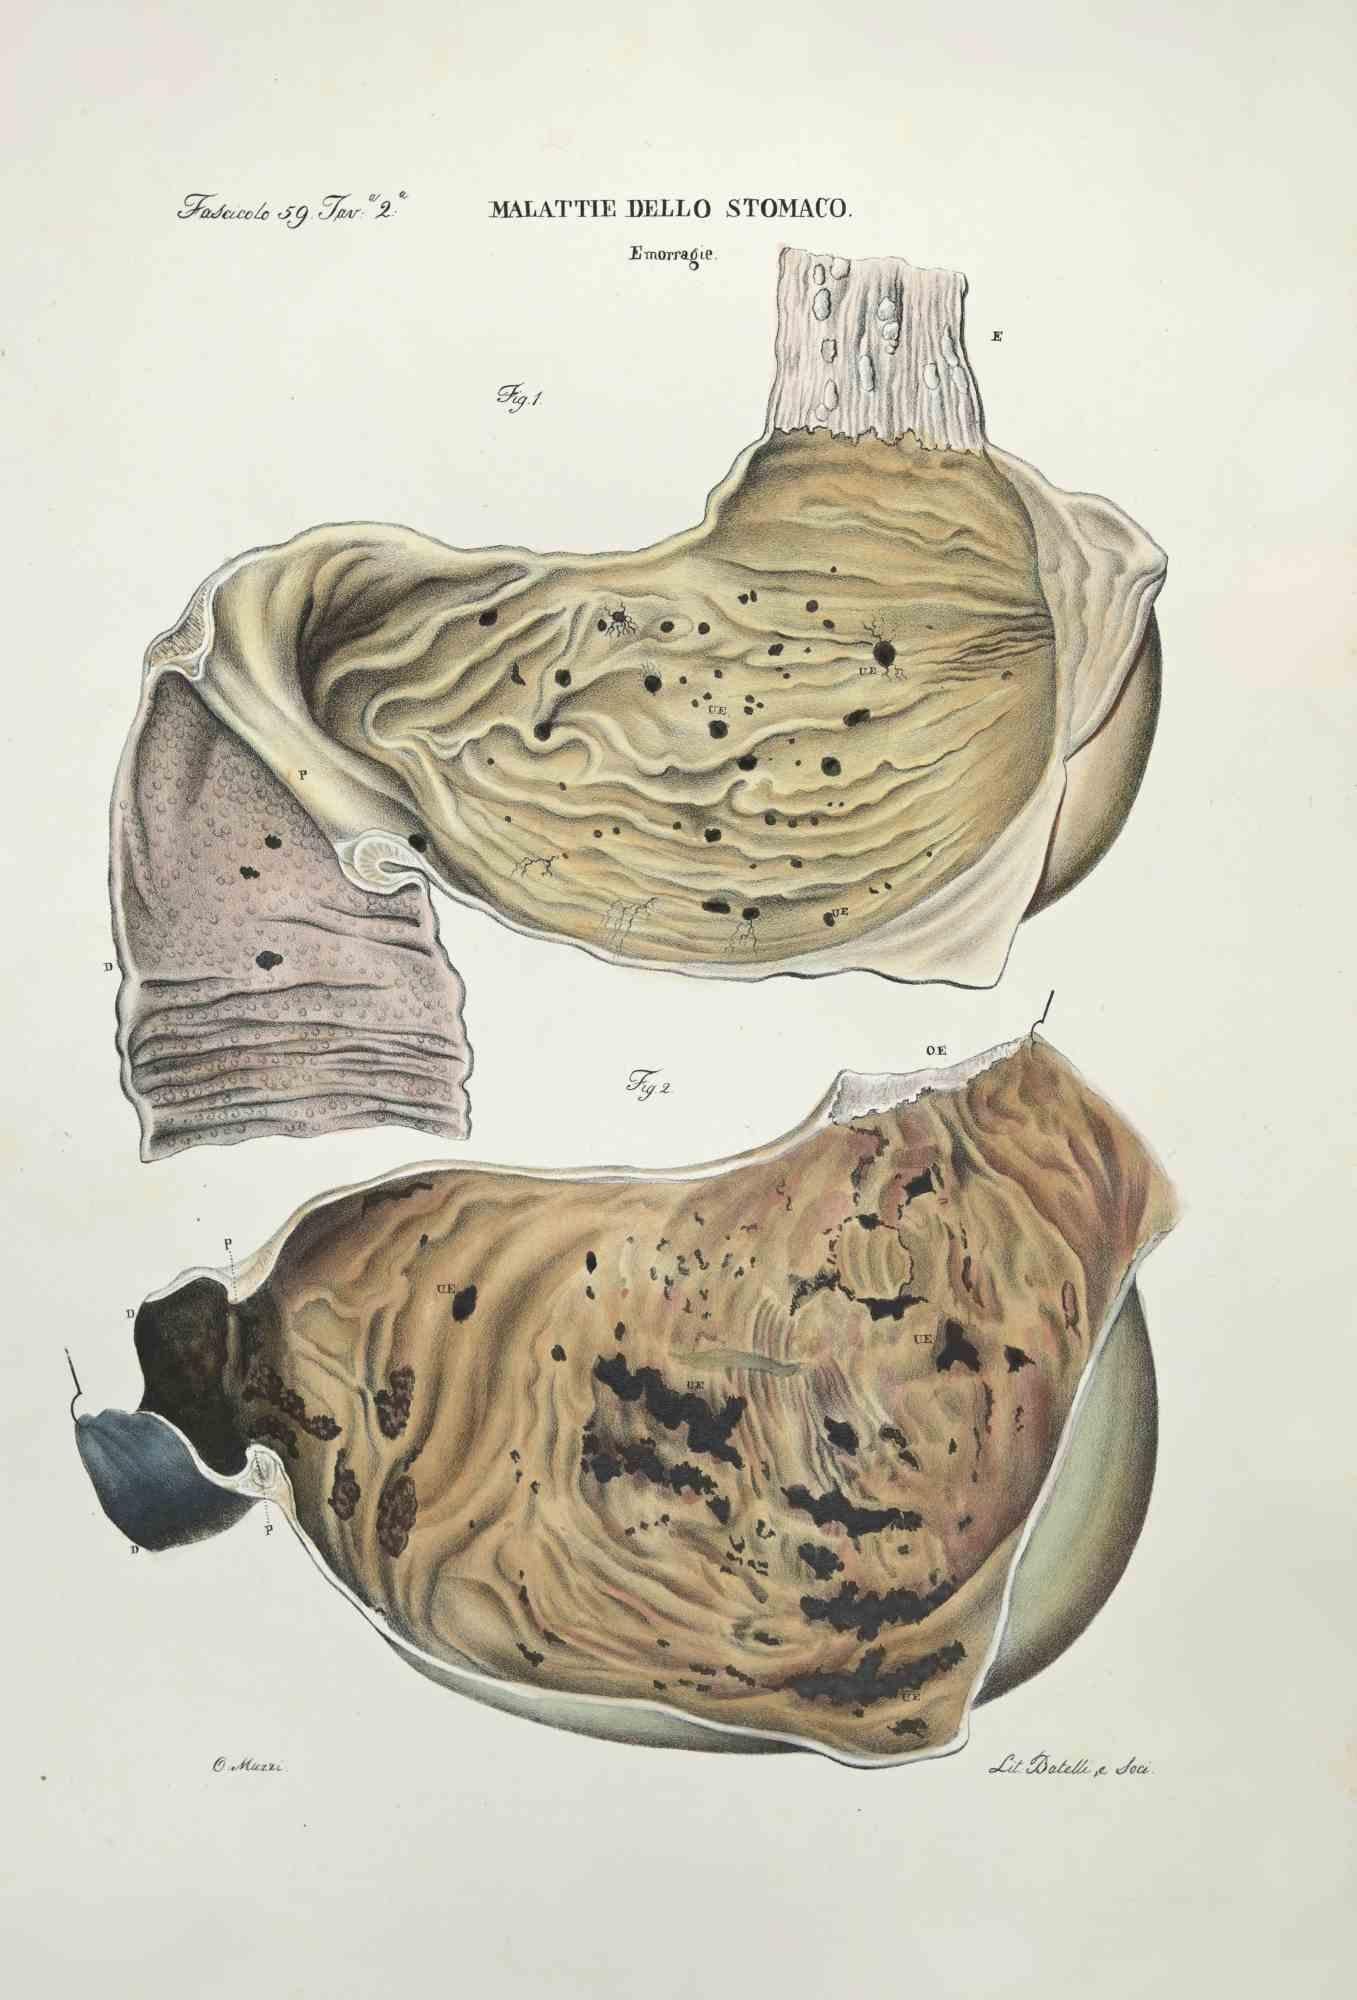 Stomach Diseases is a lithograph hand colored by Ottavio Muzzi for the edition of Antoine Chazal,Human Anatomy, Printers Batelli and Ridolfi, realized in 1843.

Signed on plate on the lower left margin.

The artwork belongs to the "Atlante Generale